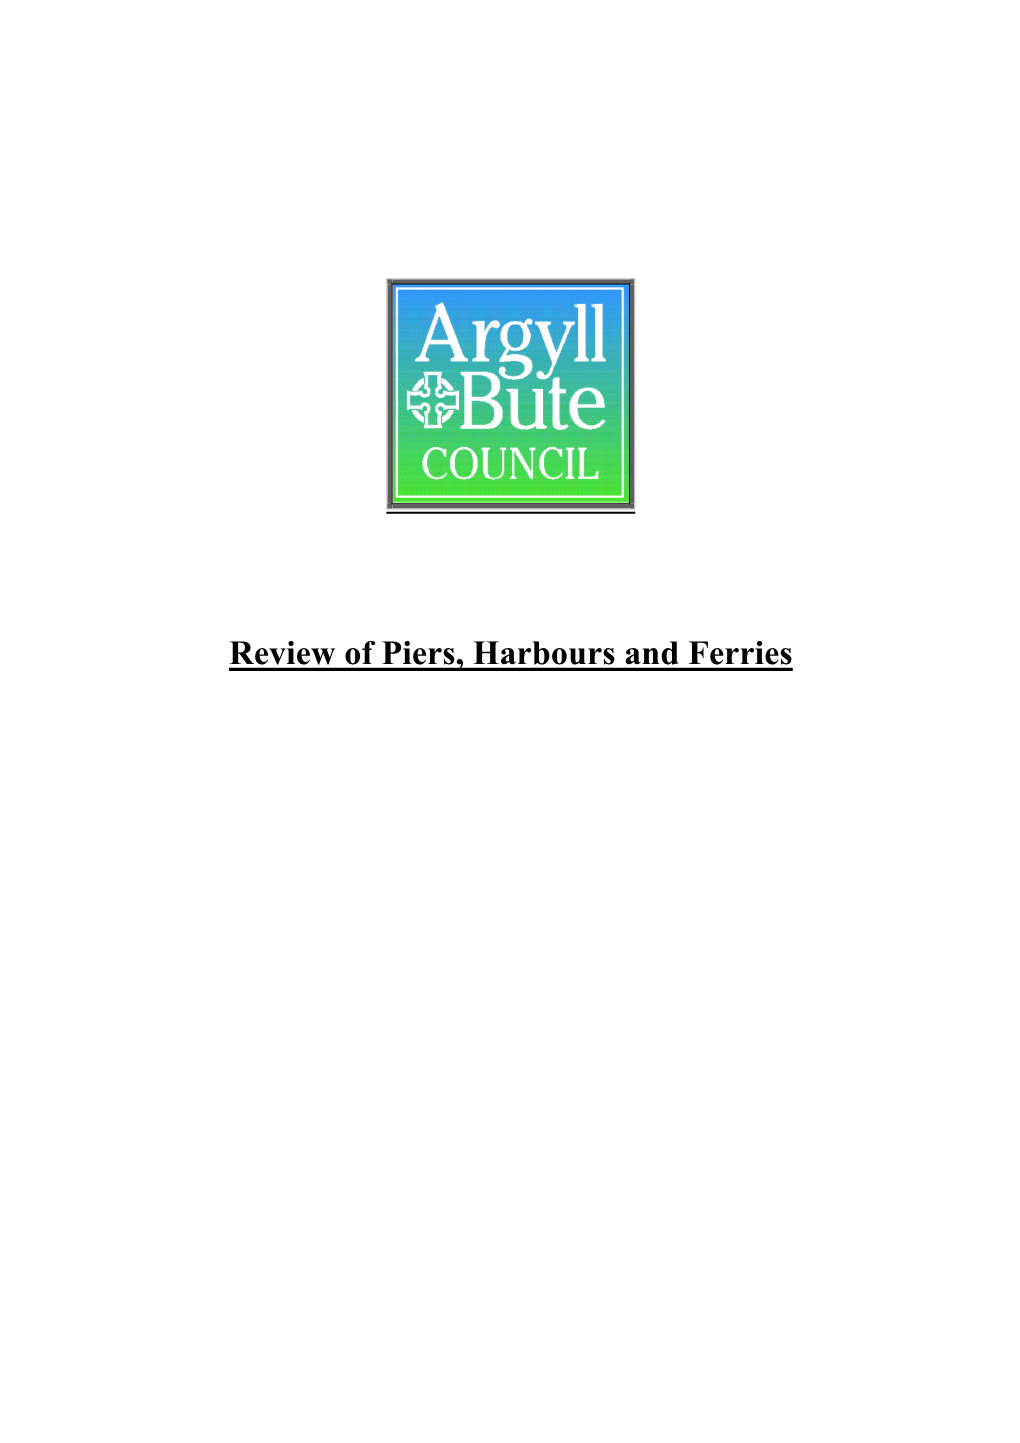 Review of Piers, Harbours and Ferries